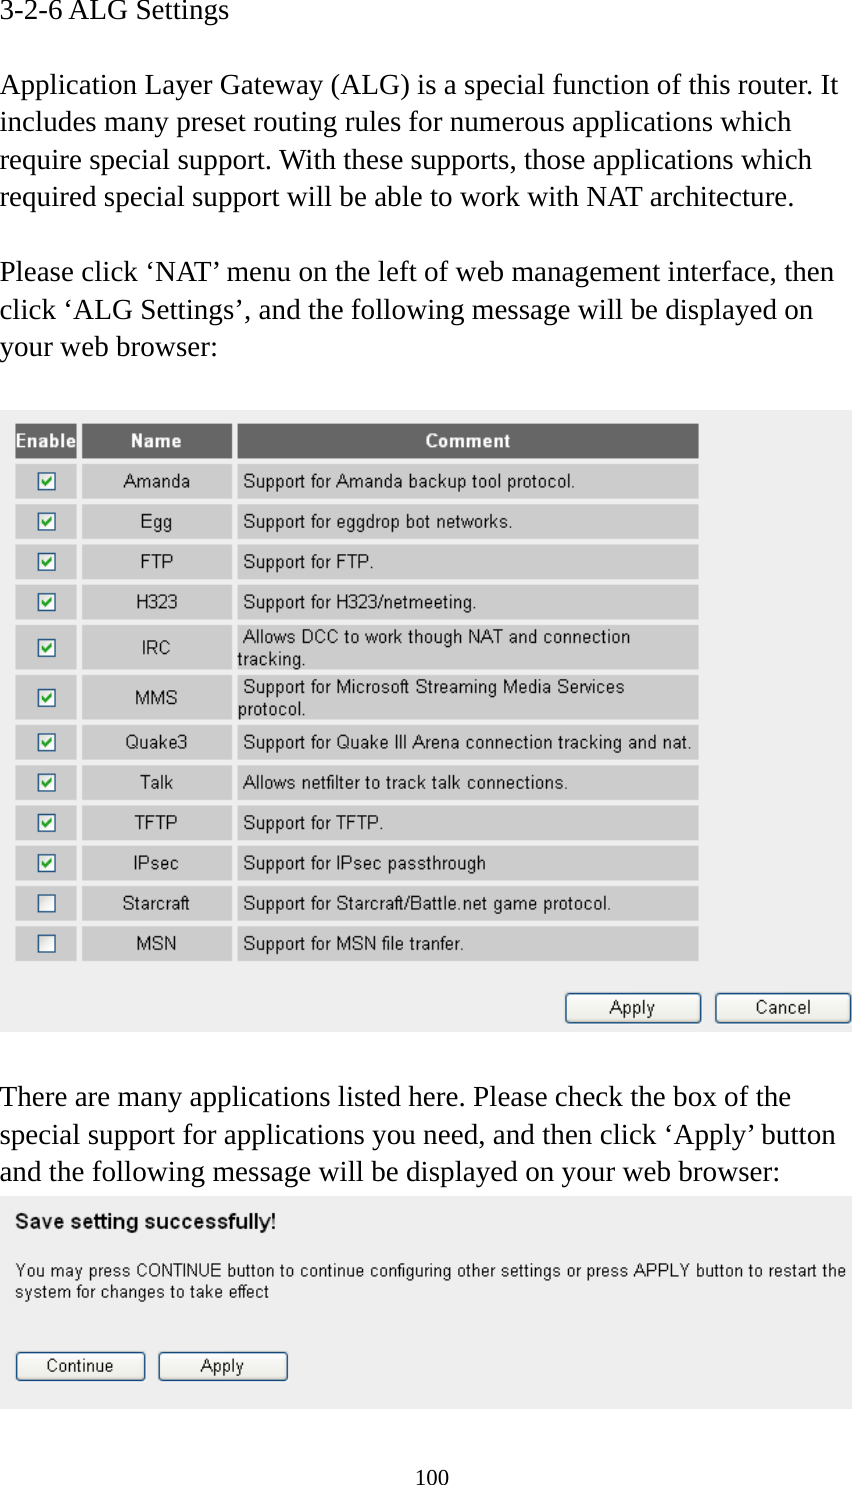 100 3-2-6 ALG Settings  Application Layer Gateway (ALG) is a special function of this router. It includes many preset routing rules for numerous applications which require special support. With these supports, those applications which required special support will be able to work with NAT architecture.  Please click ‘NAT’ menu on the left of web management interface, then click ‘ALG Settings’, and the following message will be displayed on your web browser:    There are many applications listed here. Please check the box of the special support for applications you need, and then click ‘Apply’ button and the following message will be displayed on your web browser:  